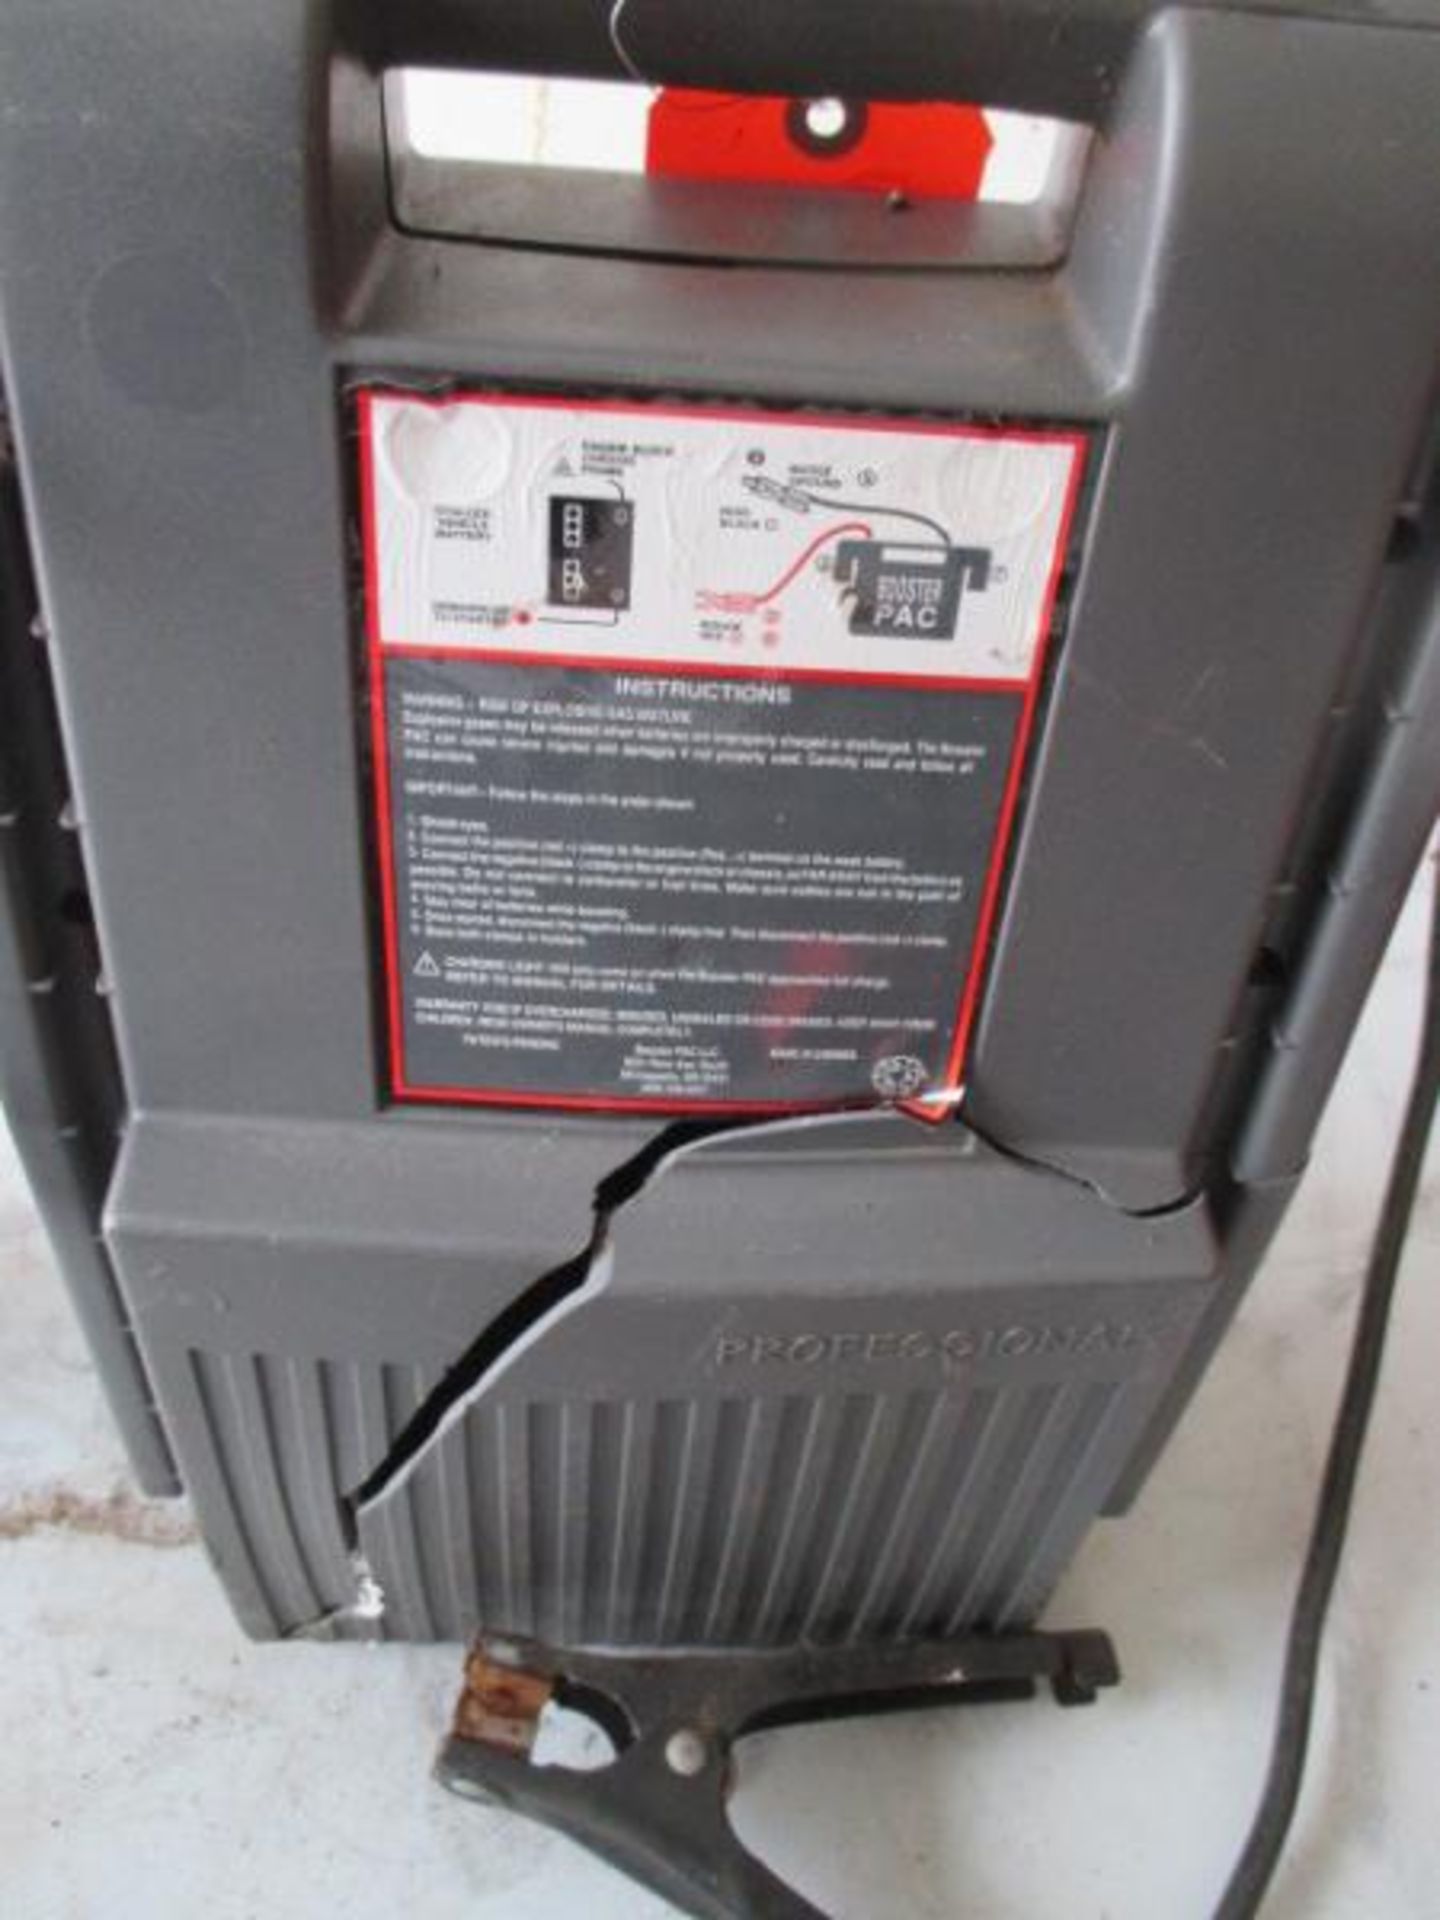 (2) Jump Packs - (1) Solar Commercial Booster Pac, ES6000, 12V, Heavy Duty, Rechargable - Back - Image 3 of 7